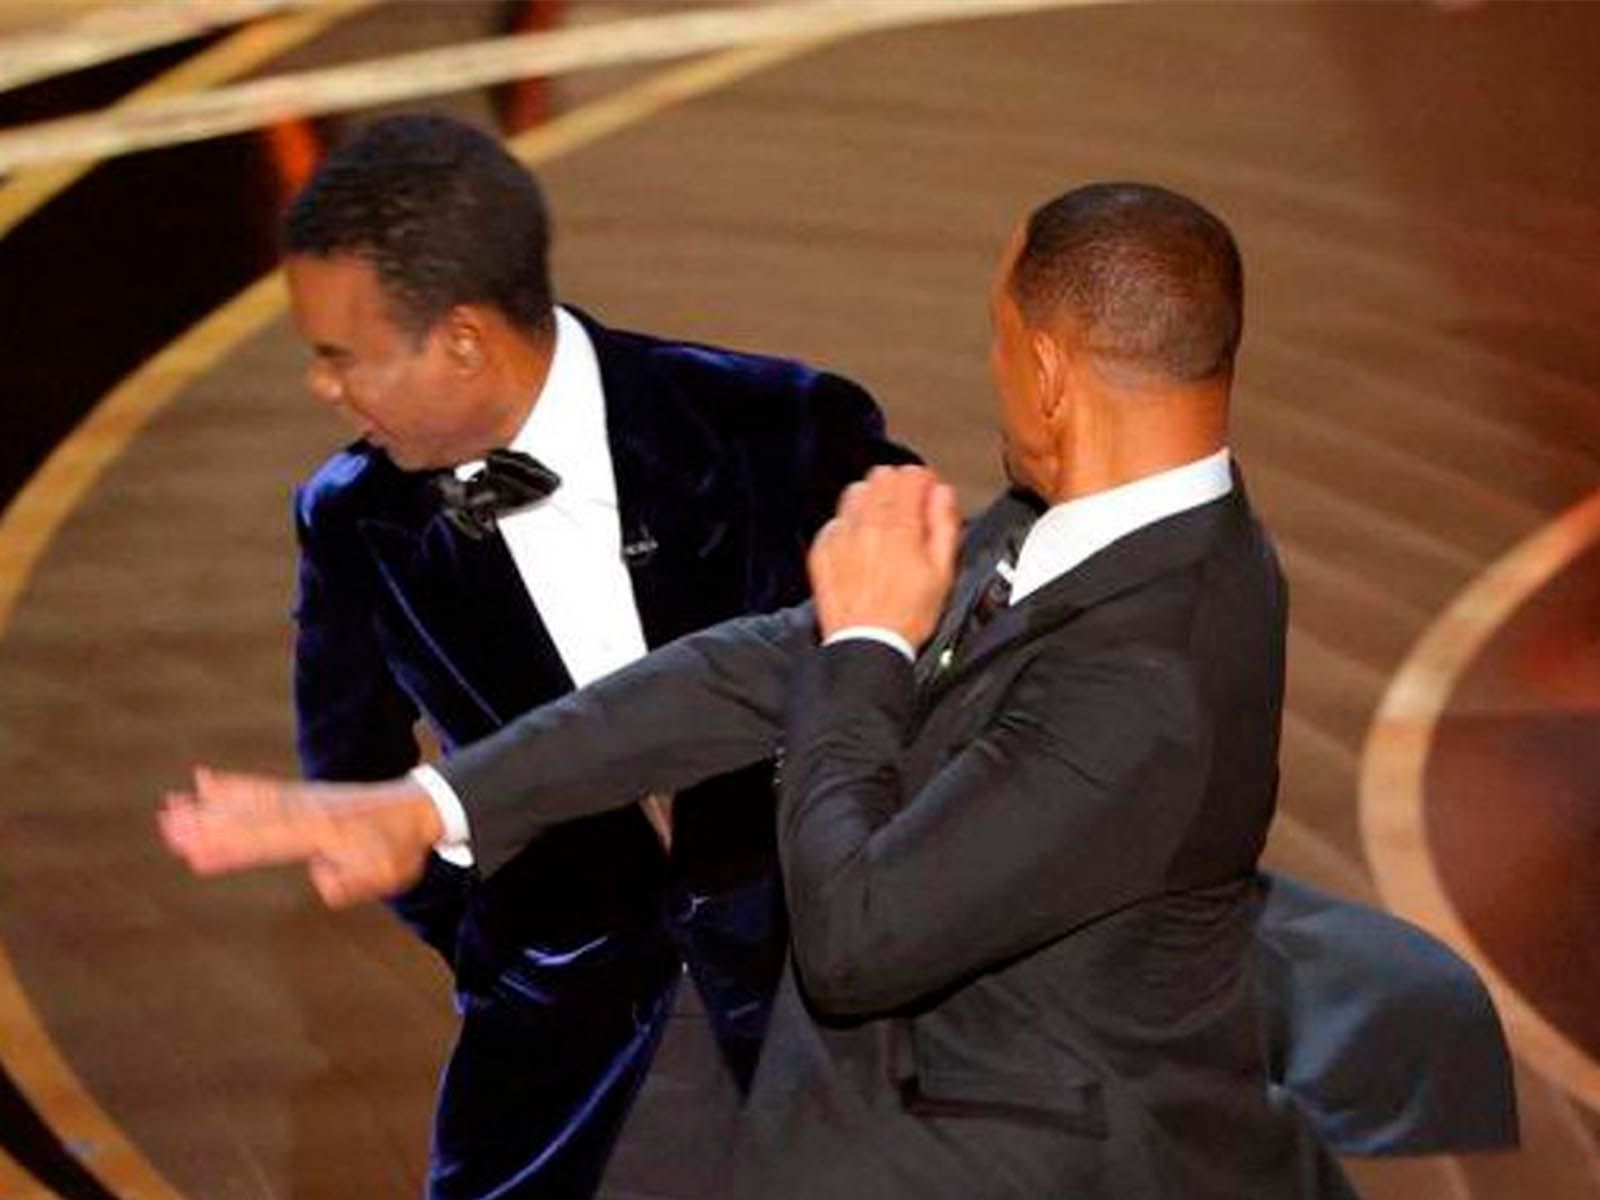 Here’s Will Smith’s apology to Chris Rock